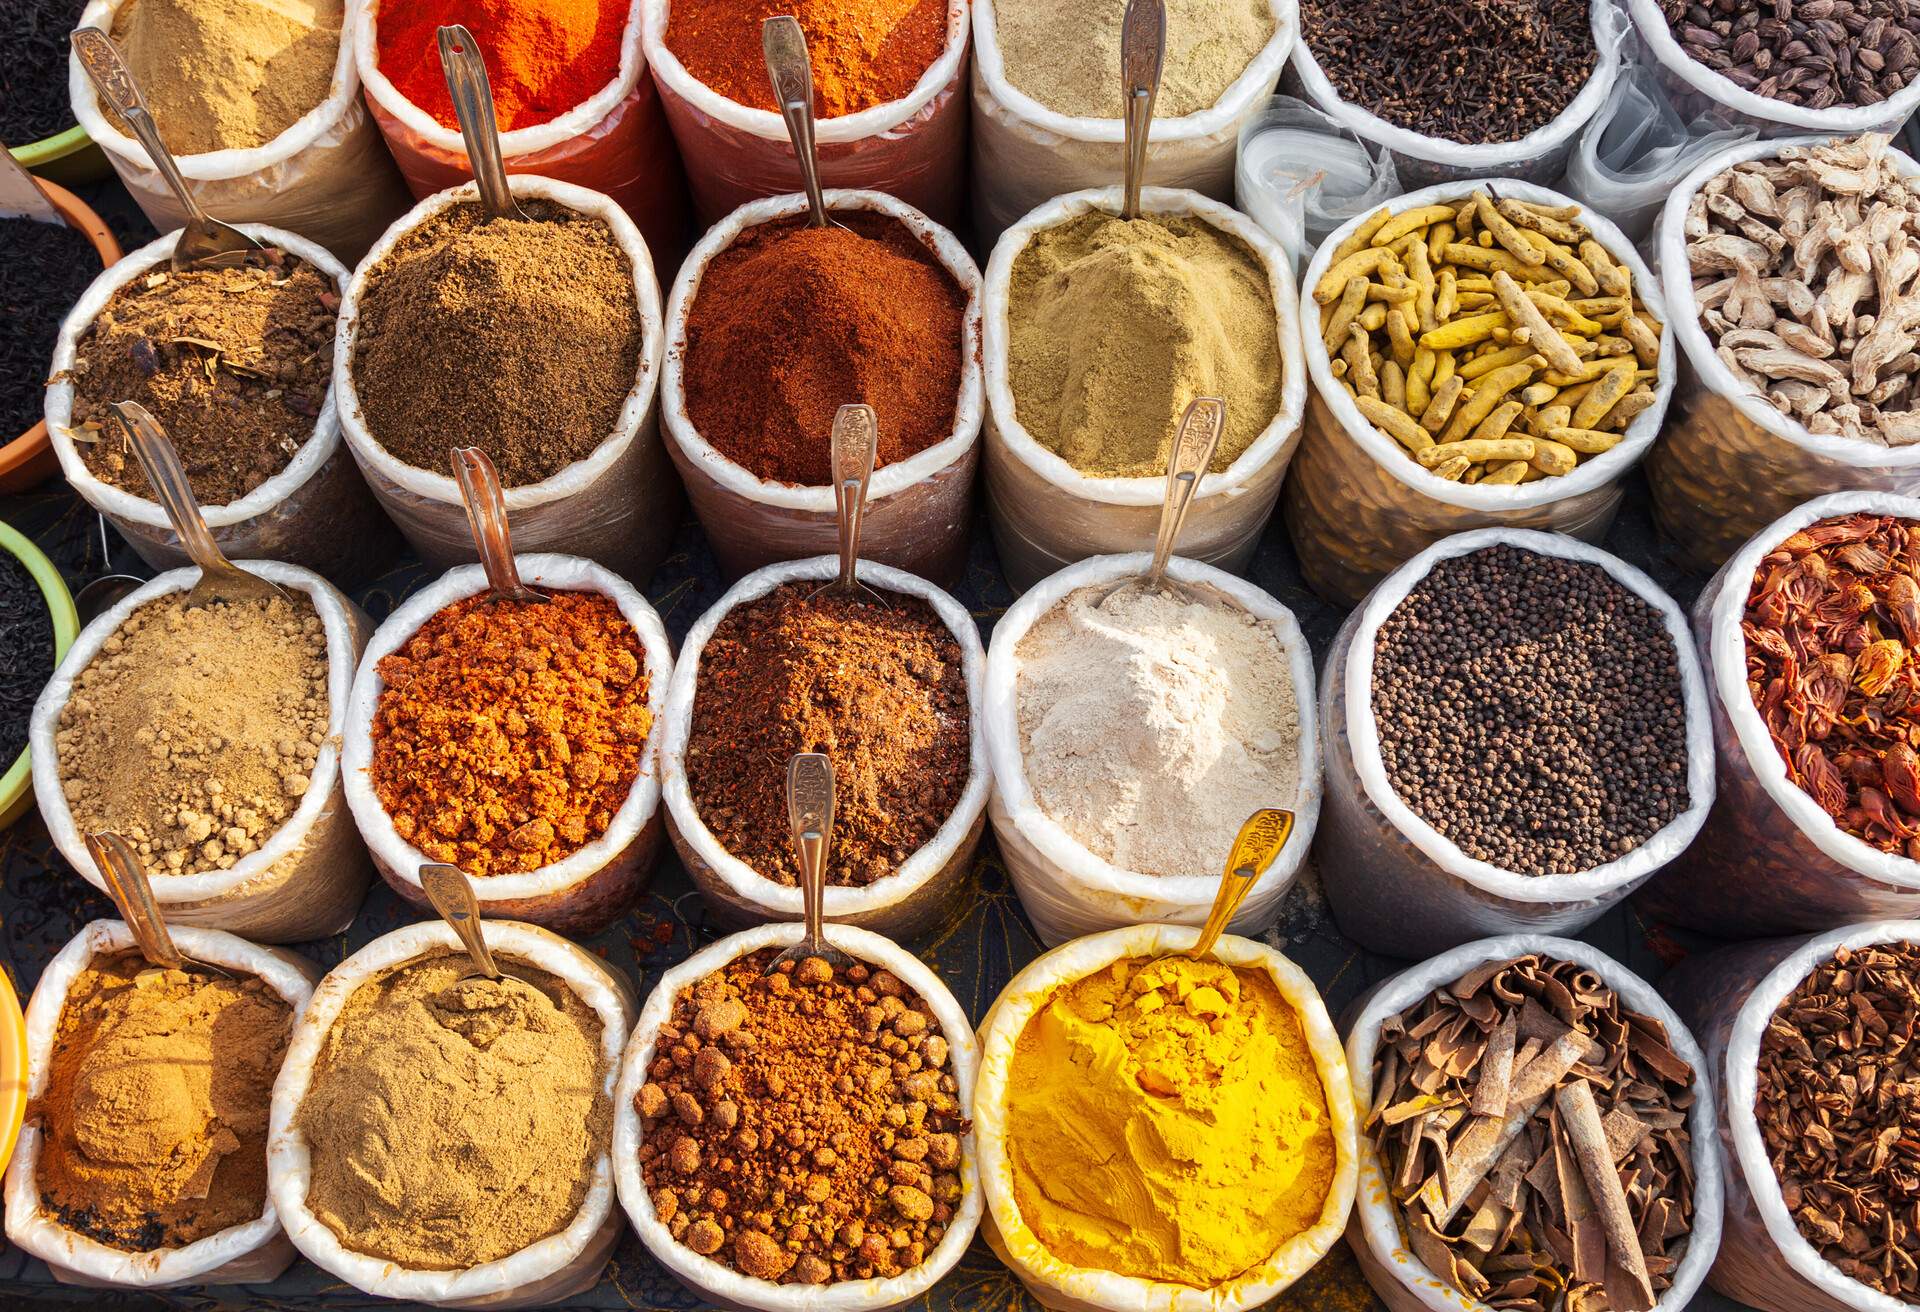 dest_india_goa_theme_food_spices_market_gettyimages-1145437421_universal_within-usage-period_91563